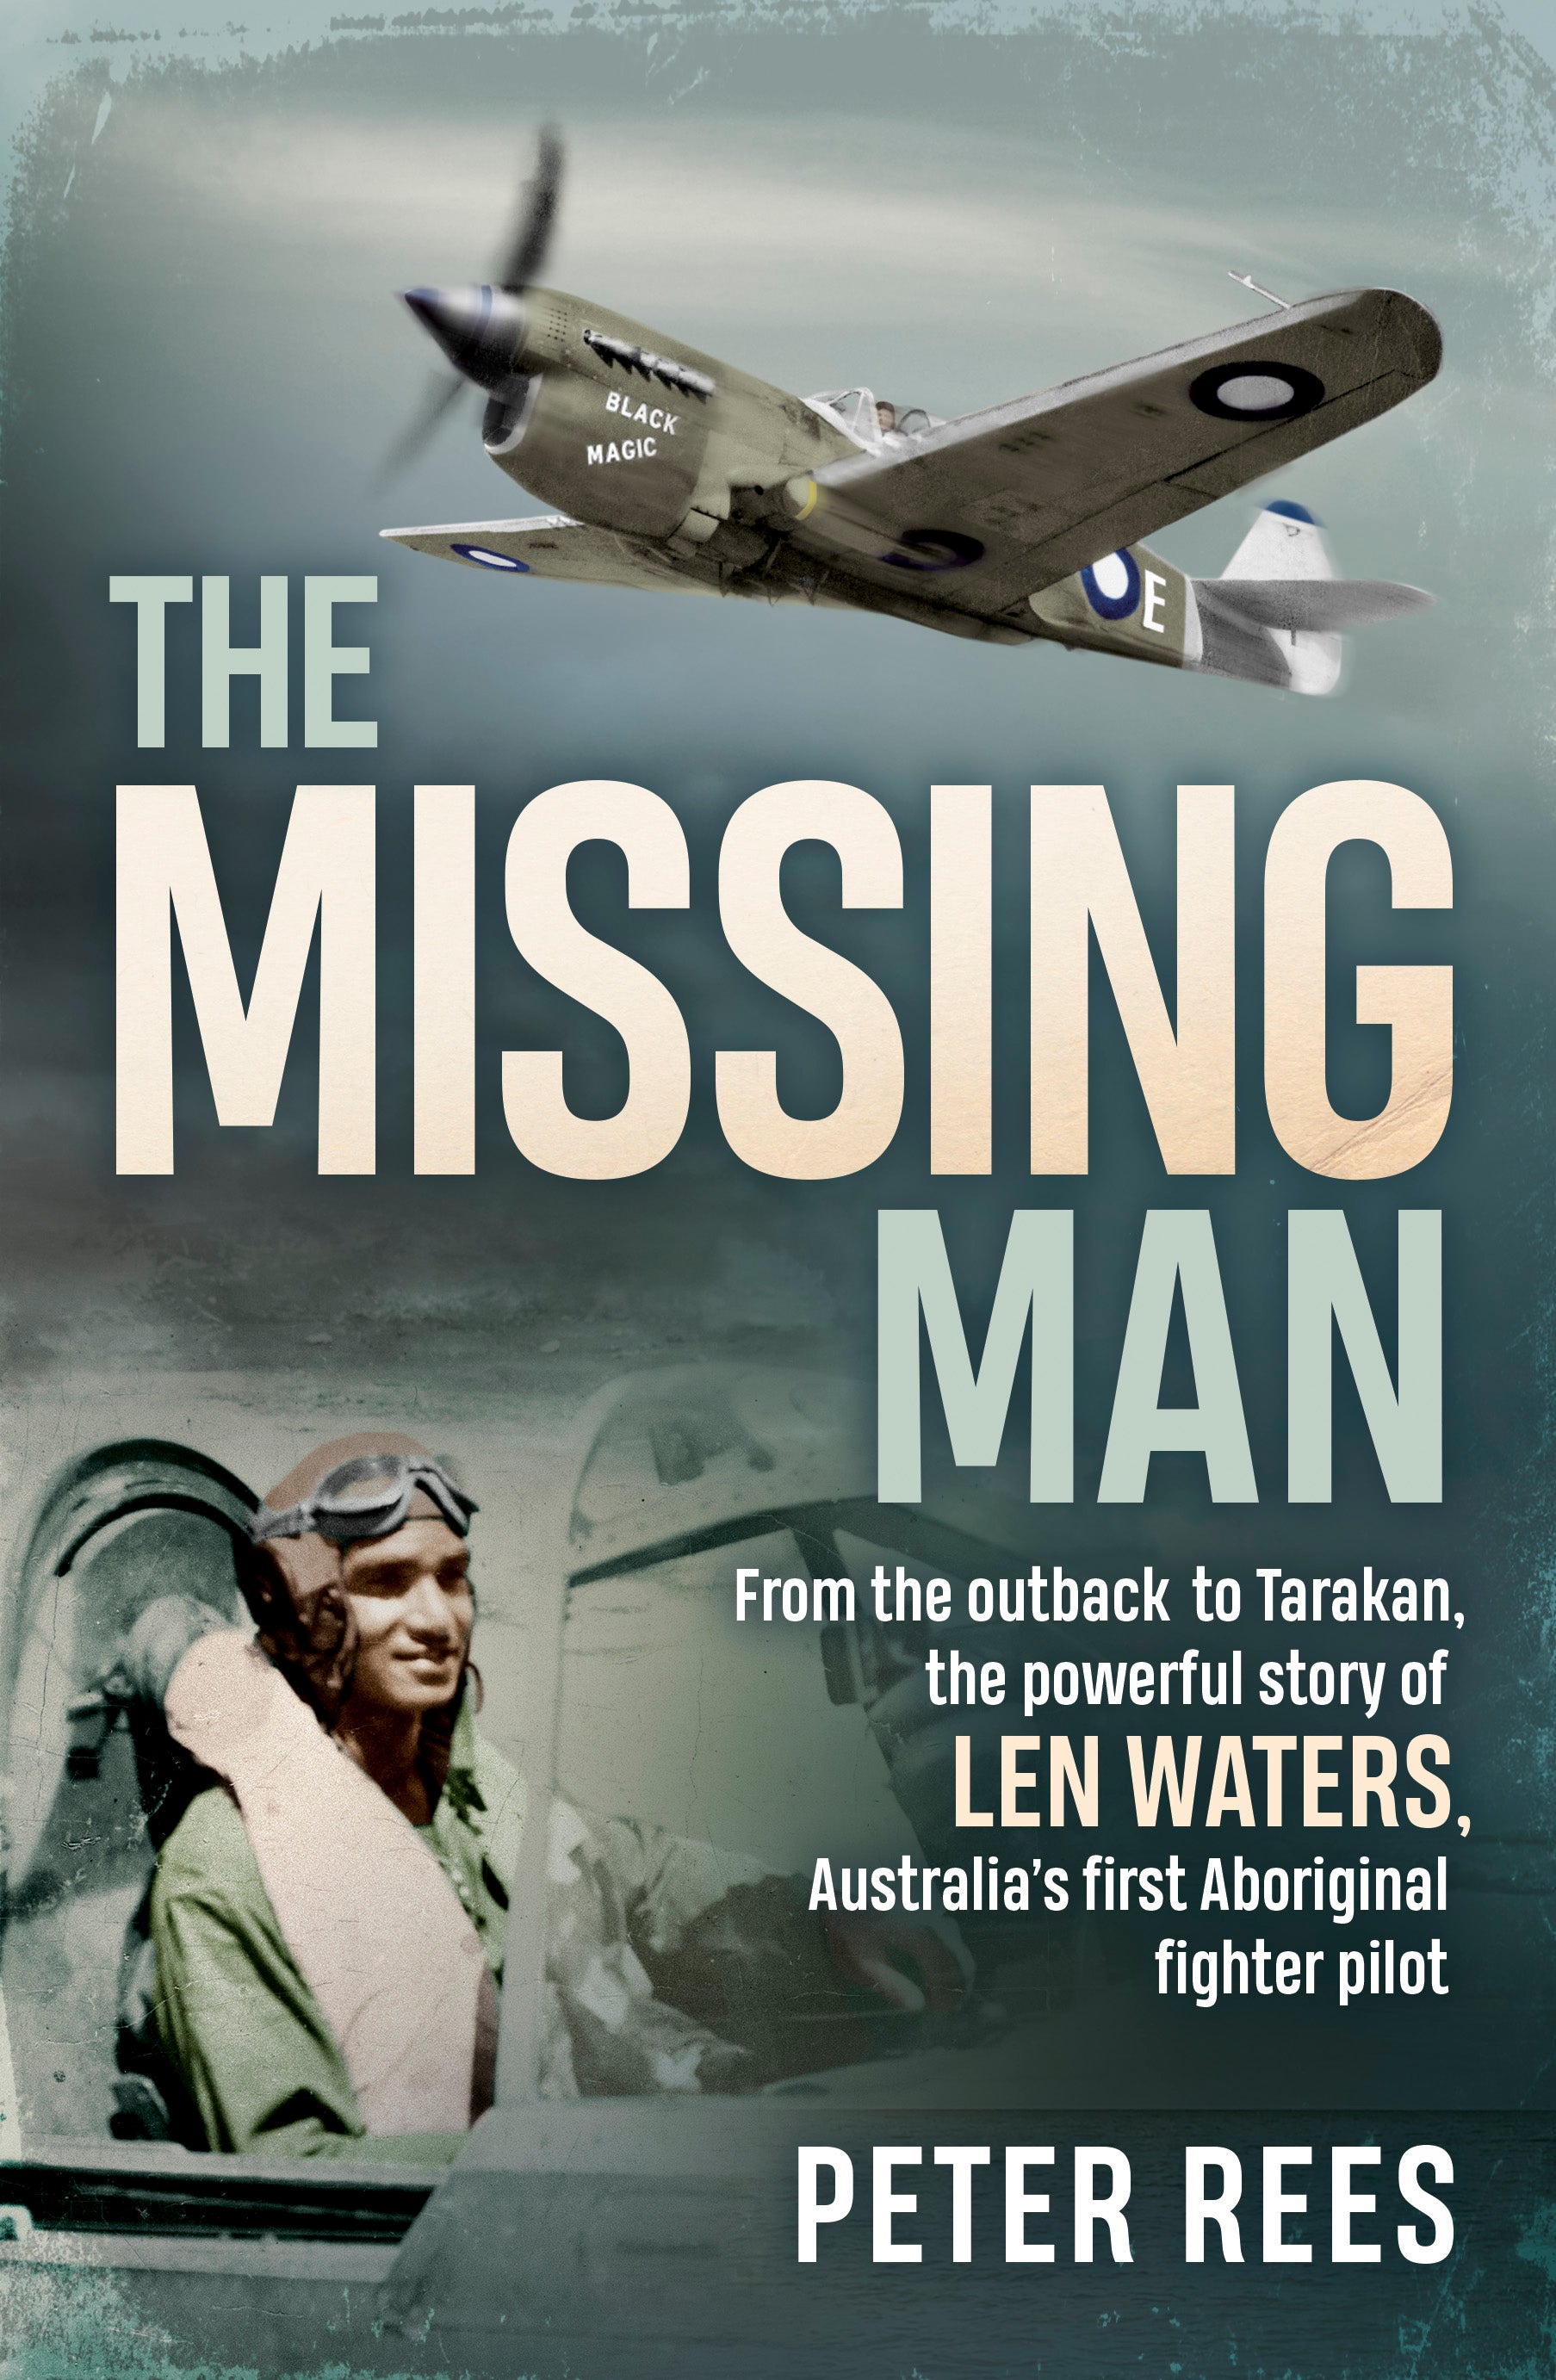 The Missing Man: From the Outback to Tarakan, the Powerful Story of Len Waters, Australia’s First Aboriginal Fighter Pilot